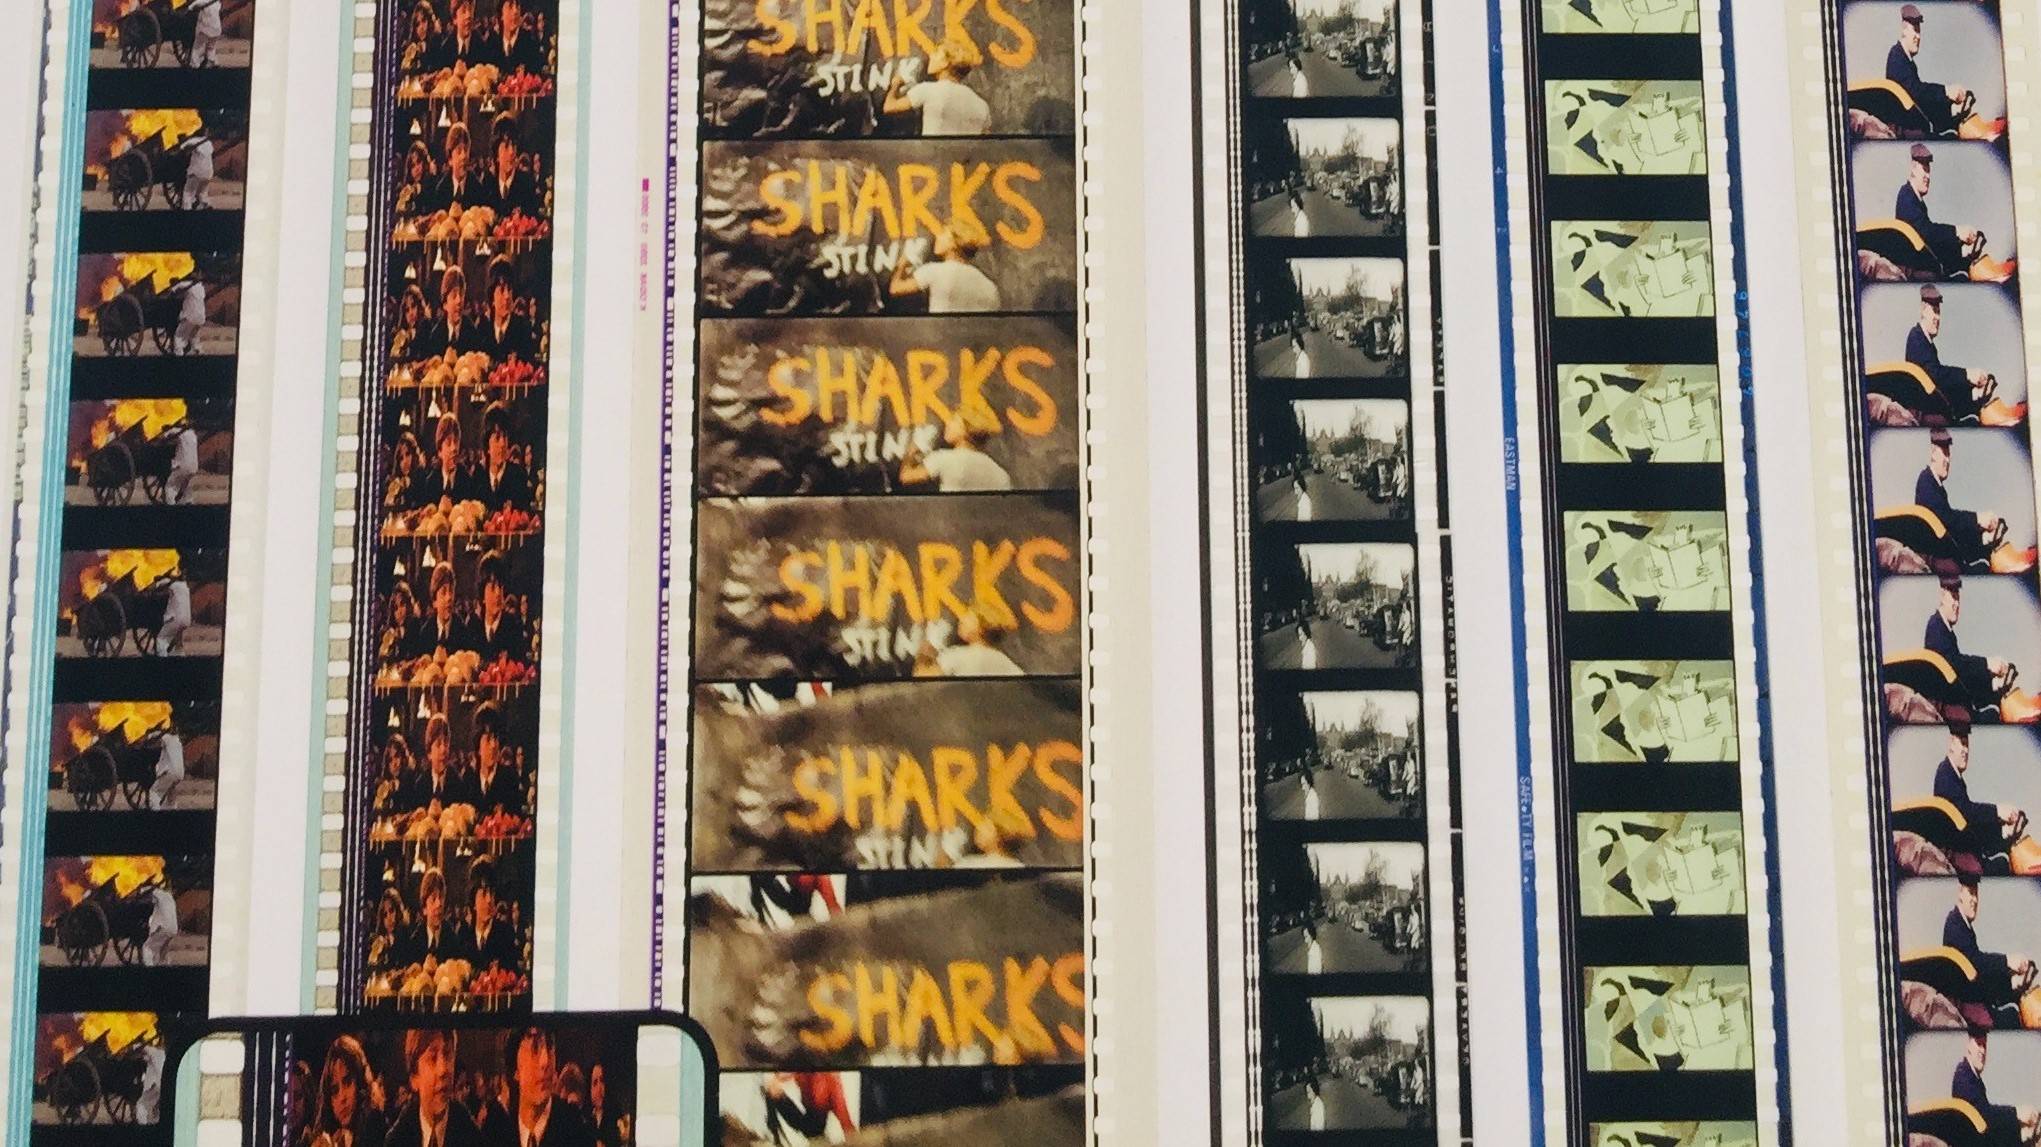 Film stock samples on display at EYE Film Museum, Amsterdam, The Netherlands